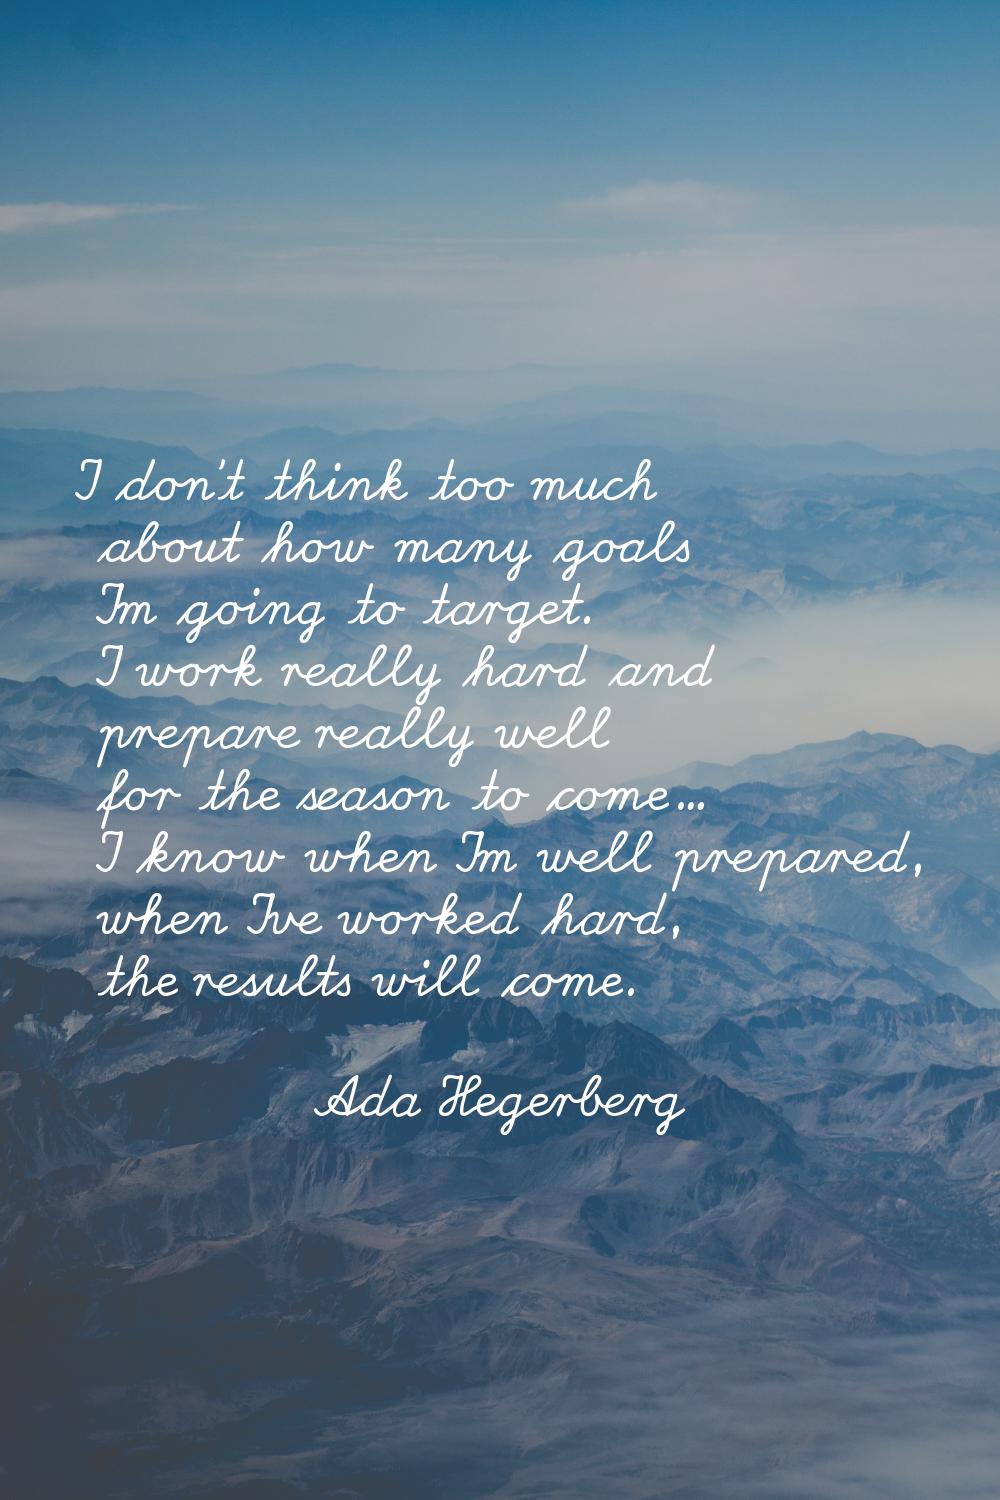 I don't think too much about how many goals I'm going to target. I work really hard and prepare rea